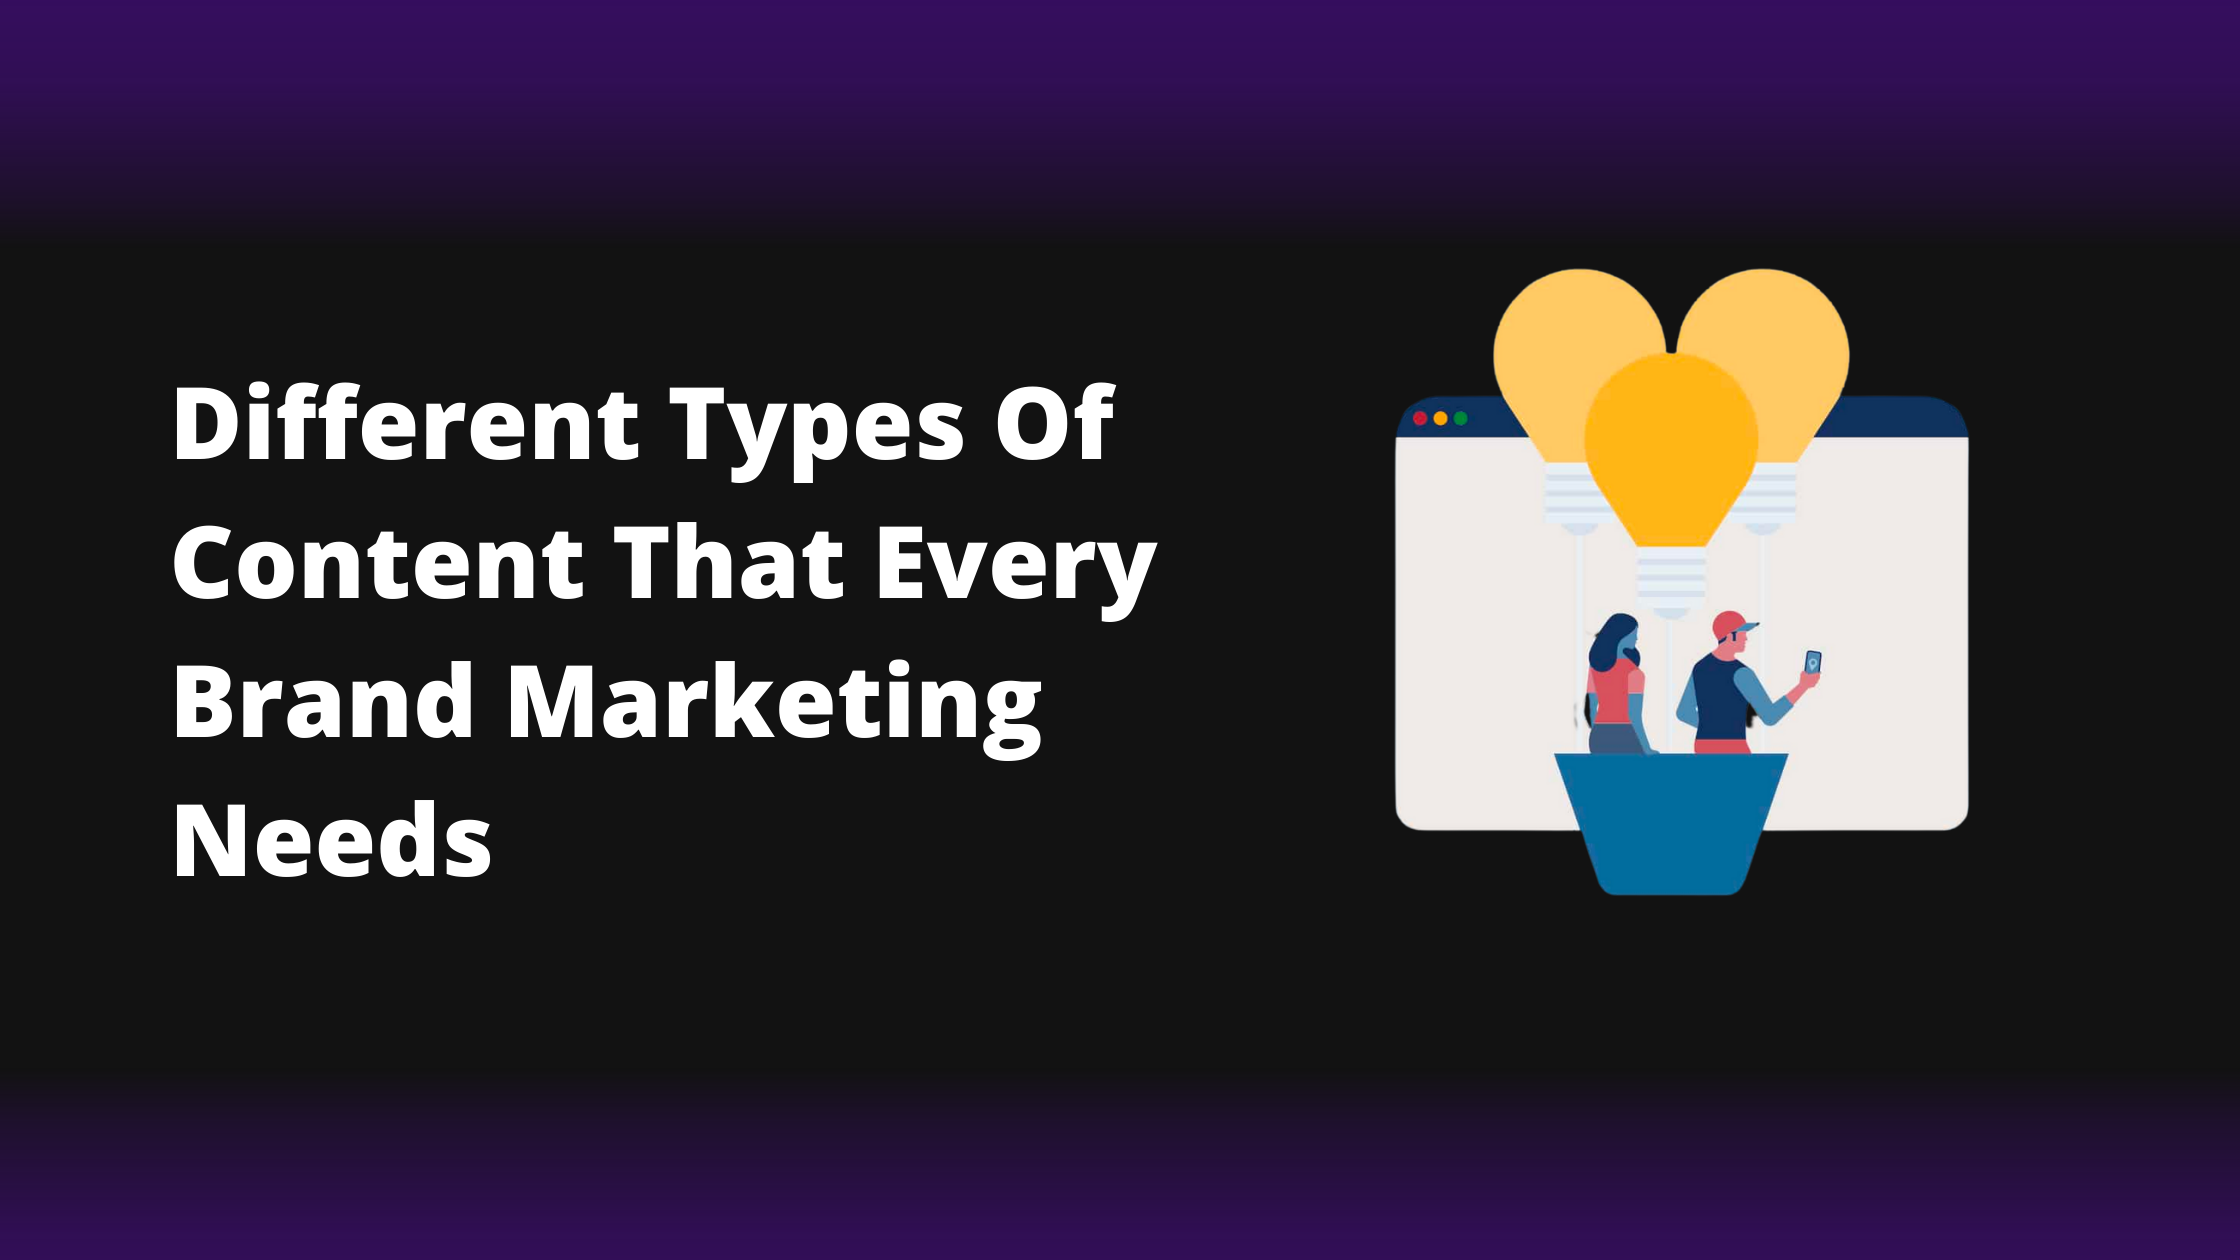 Different types of content that every brand marketing needs.